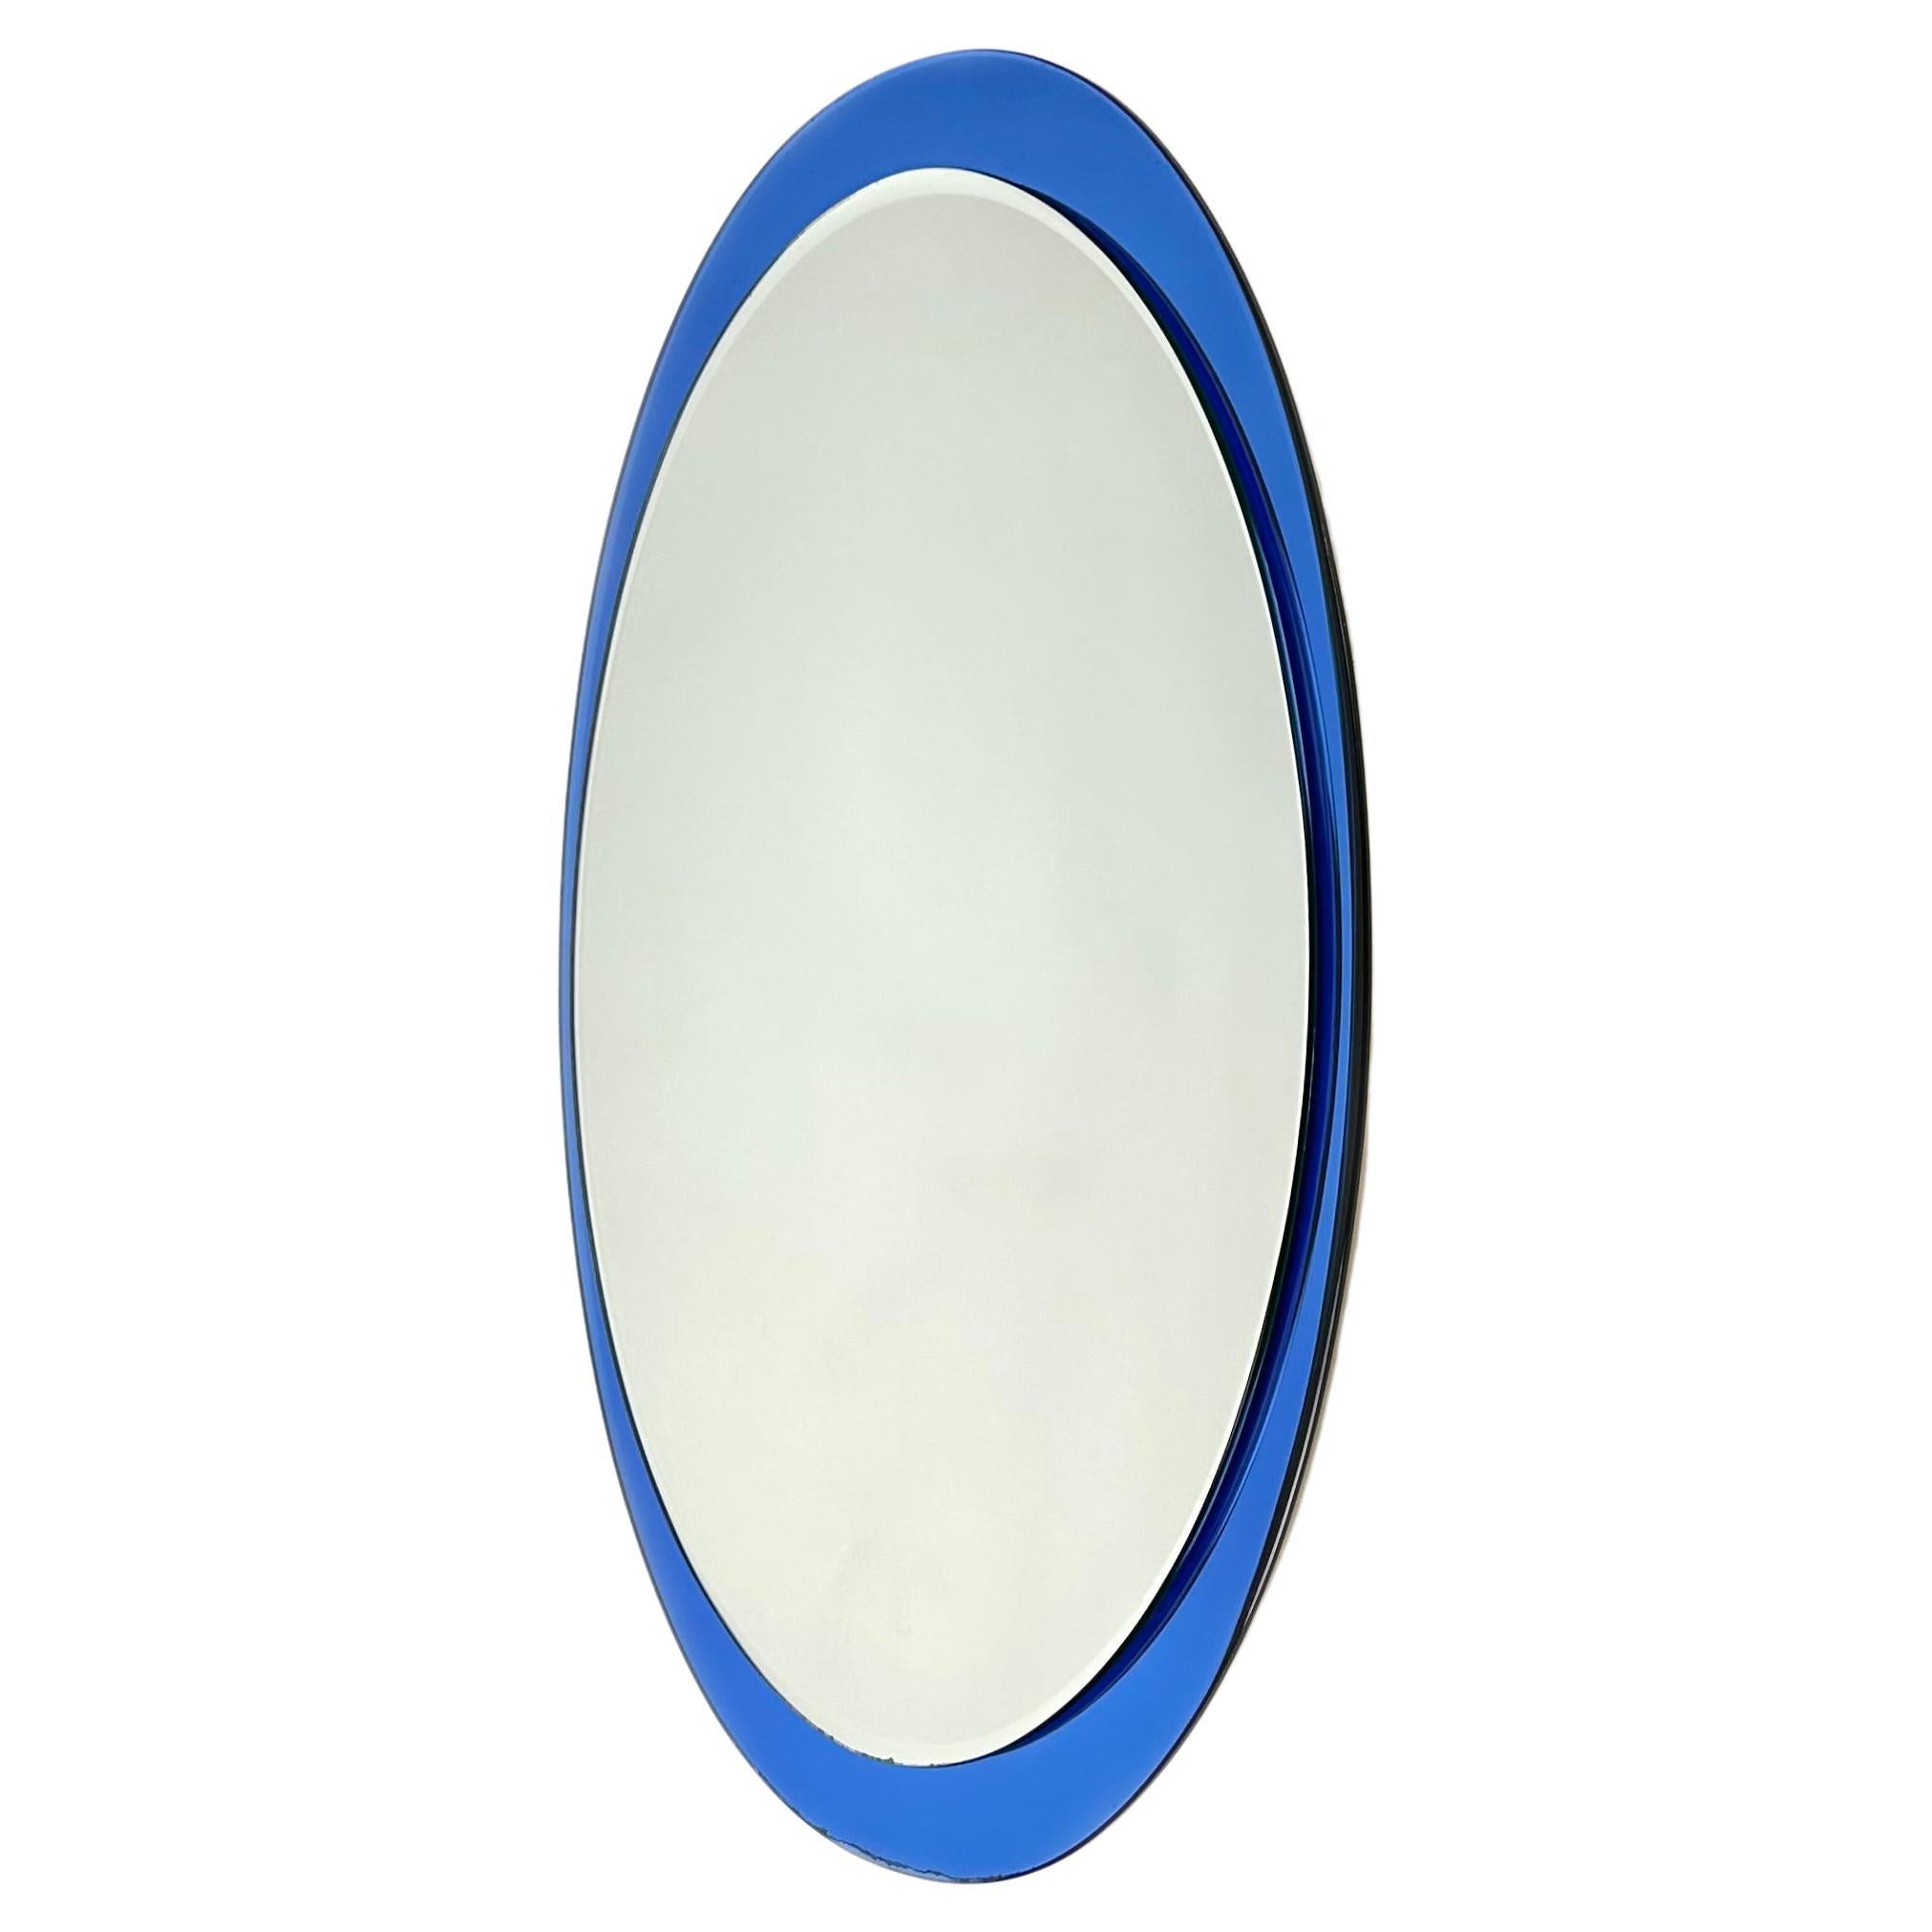 Midcentury Oval Blue Wall Mirror by Metalvetro Galvorame, Italy, 1970s For Sale